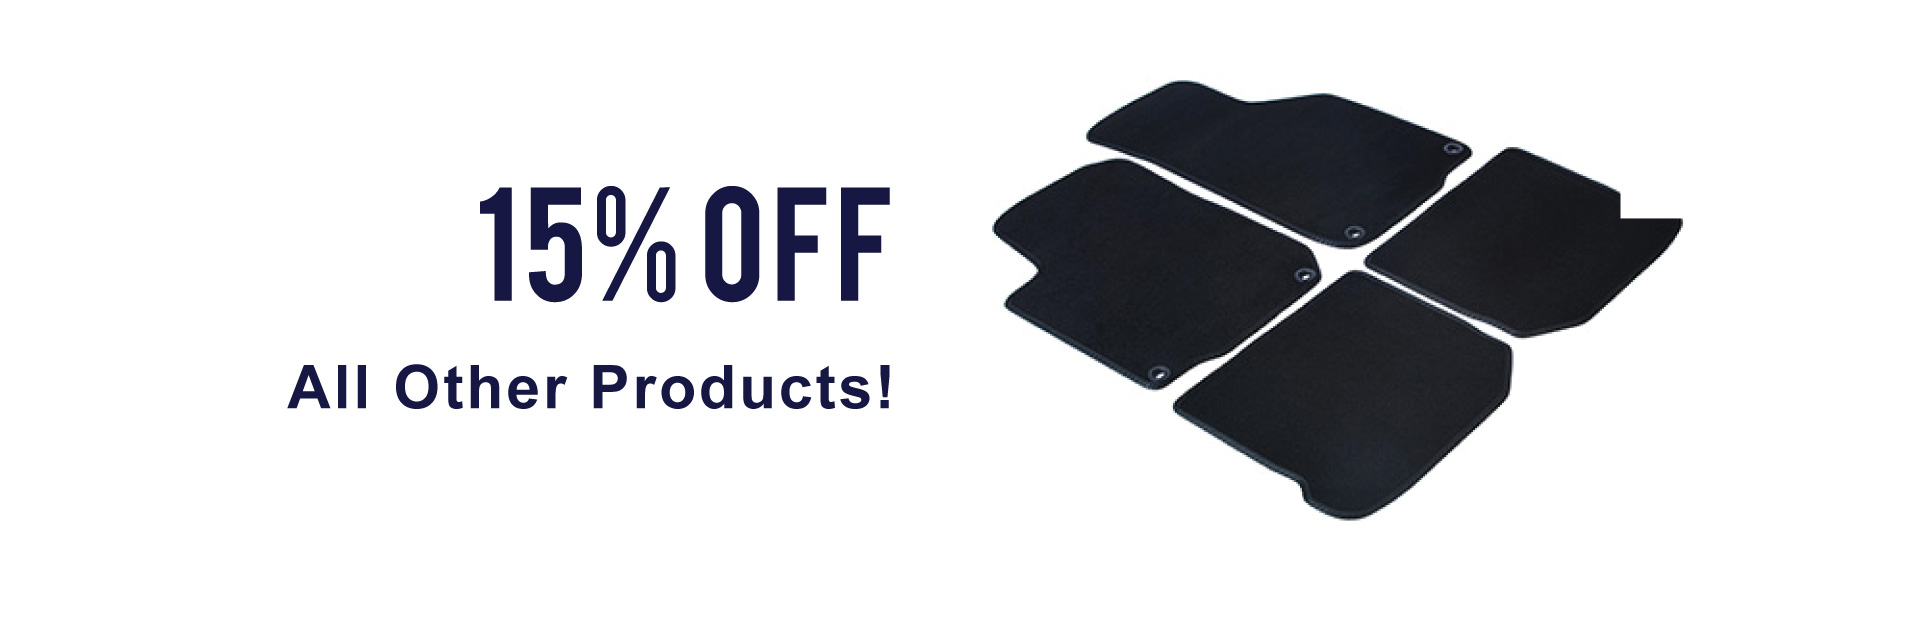 15% Off All Other Products!